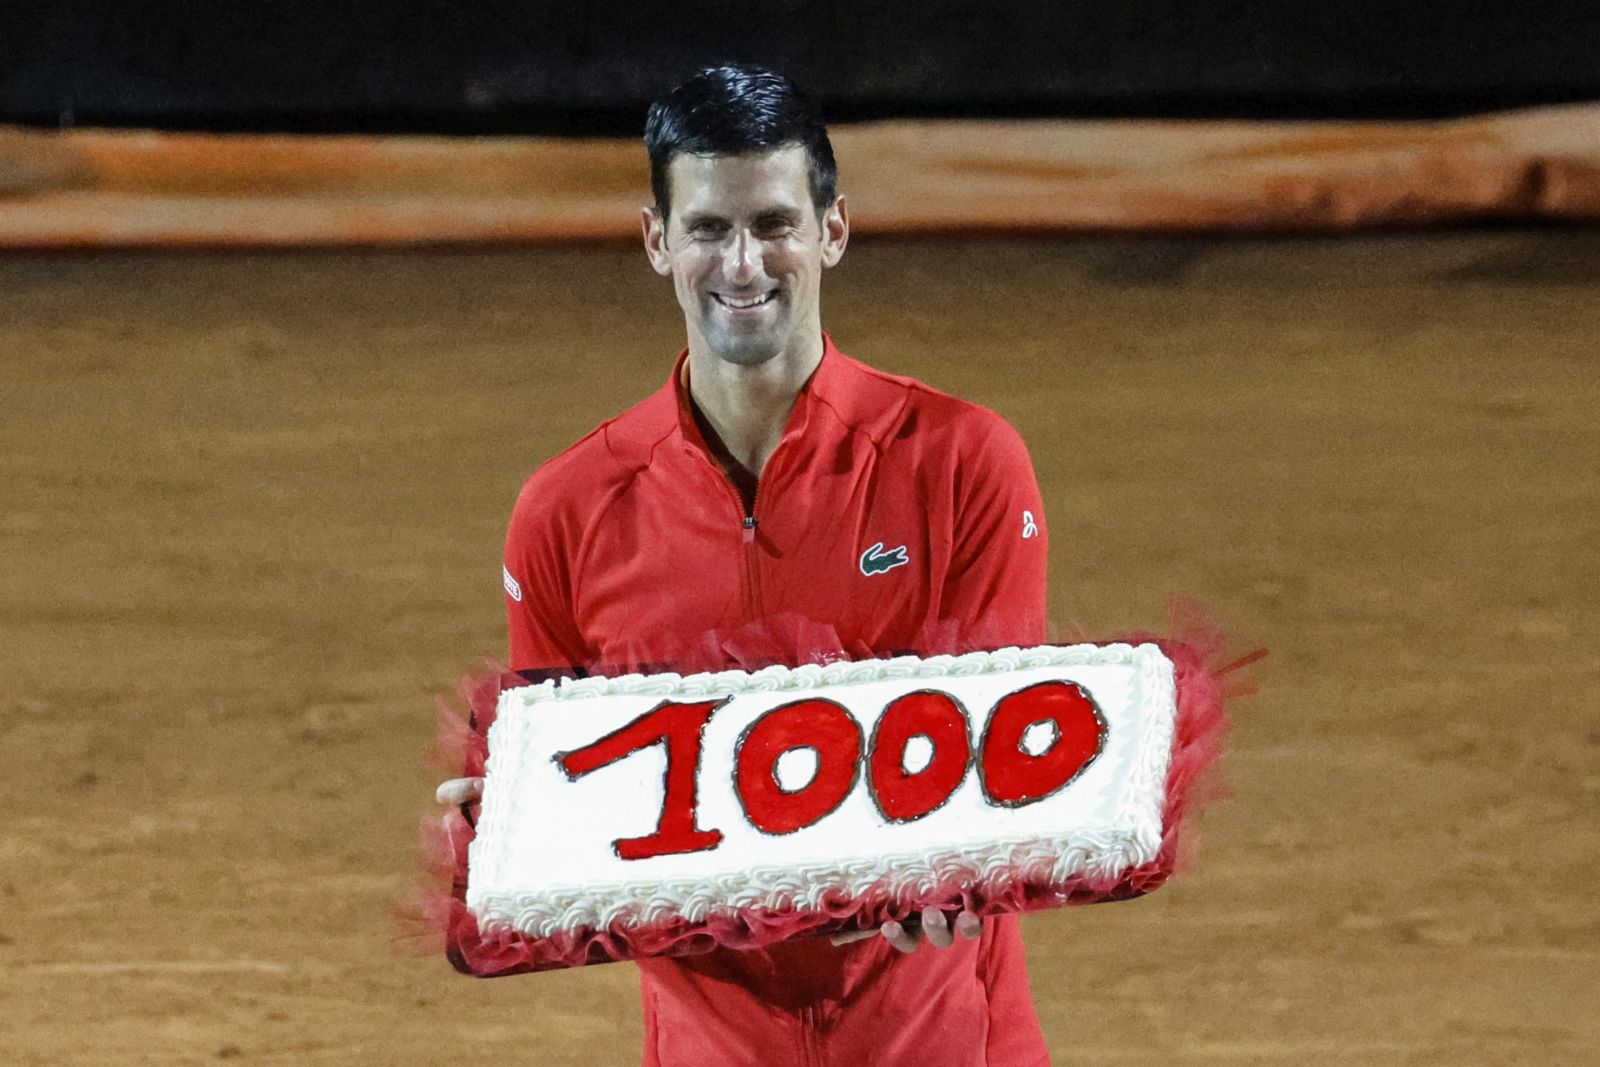 epa09947607 Serbia's Novak Djokovic holds a cake with the number of his 1,000th tour-level win earned after winning his men's singles semifinal match against Casper Ruud of Norway at the Italian Open tennis tournament in Rome, Italy, 14 May 2022.  EPA/FABIO FRUSTACI